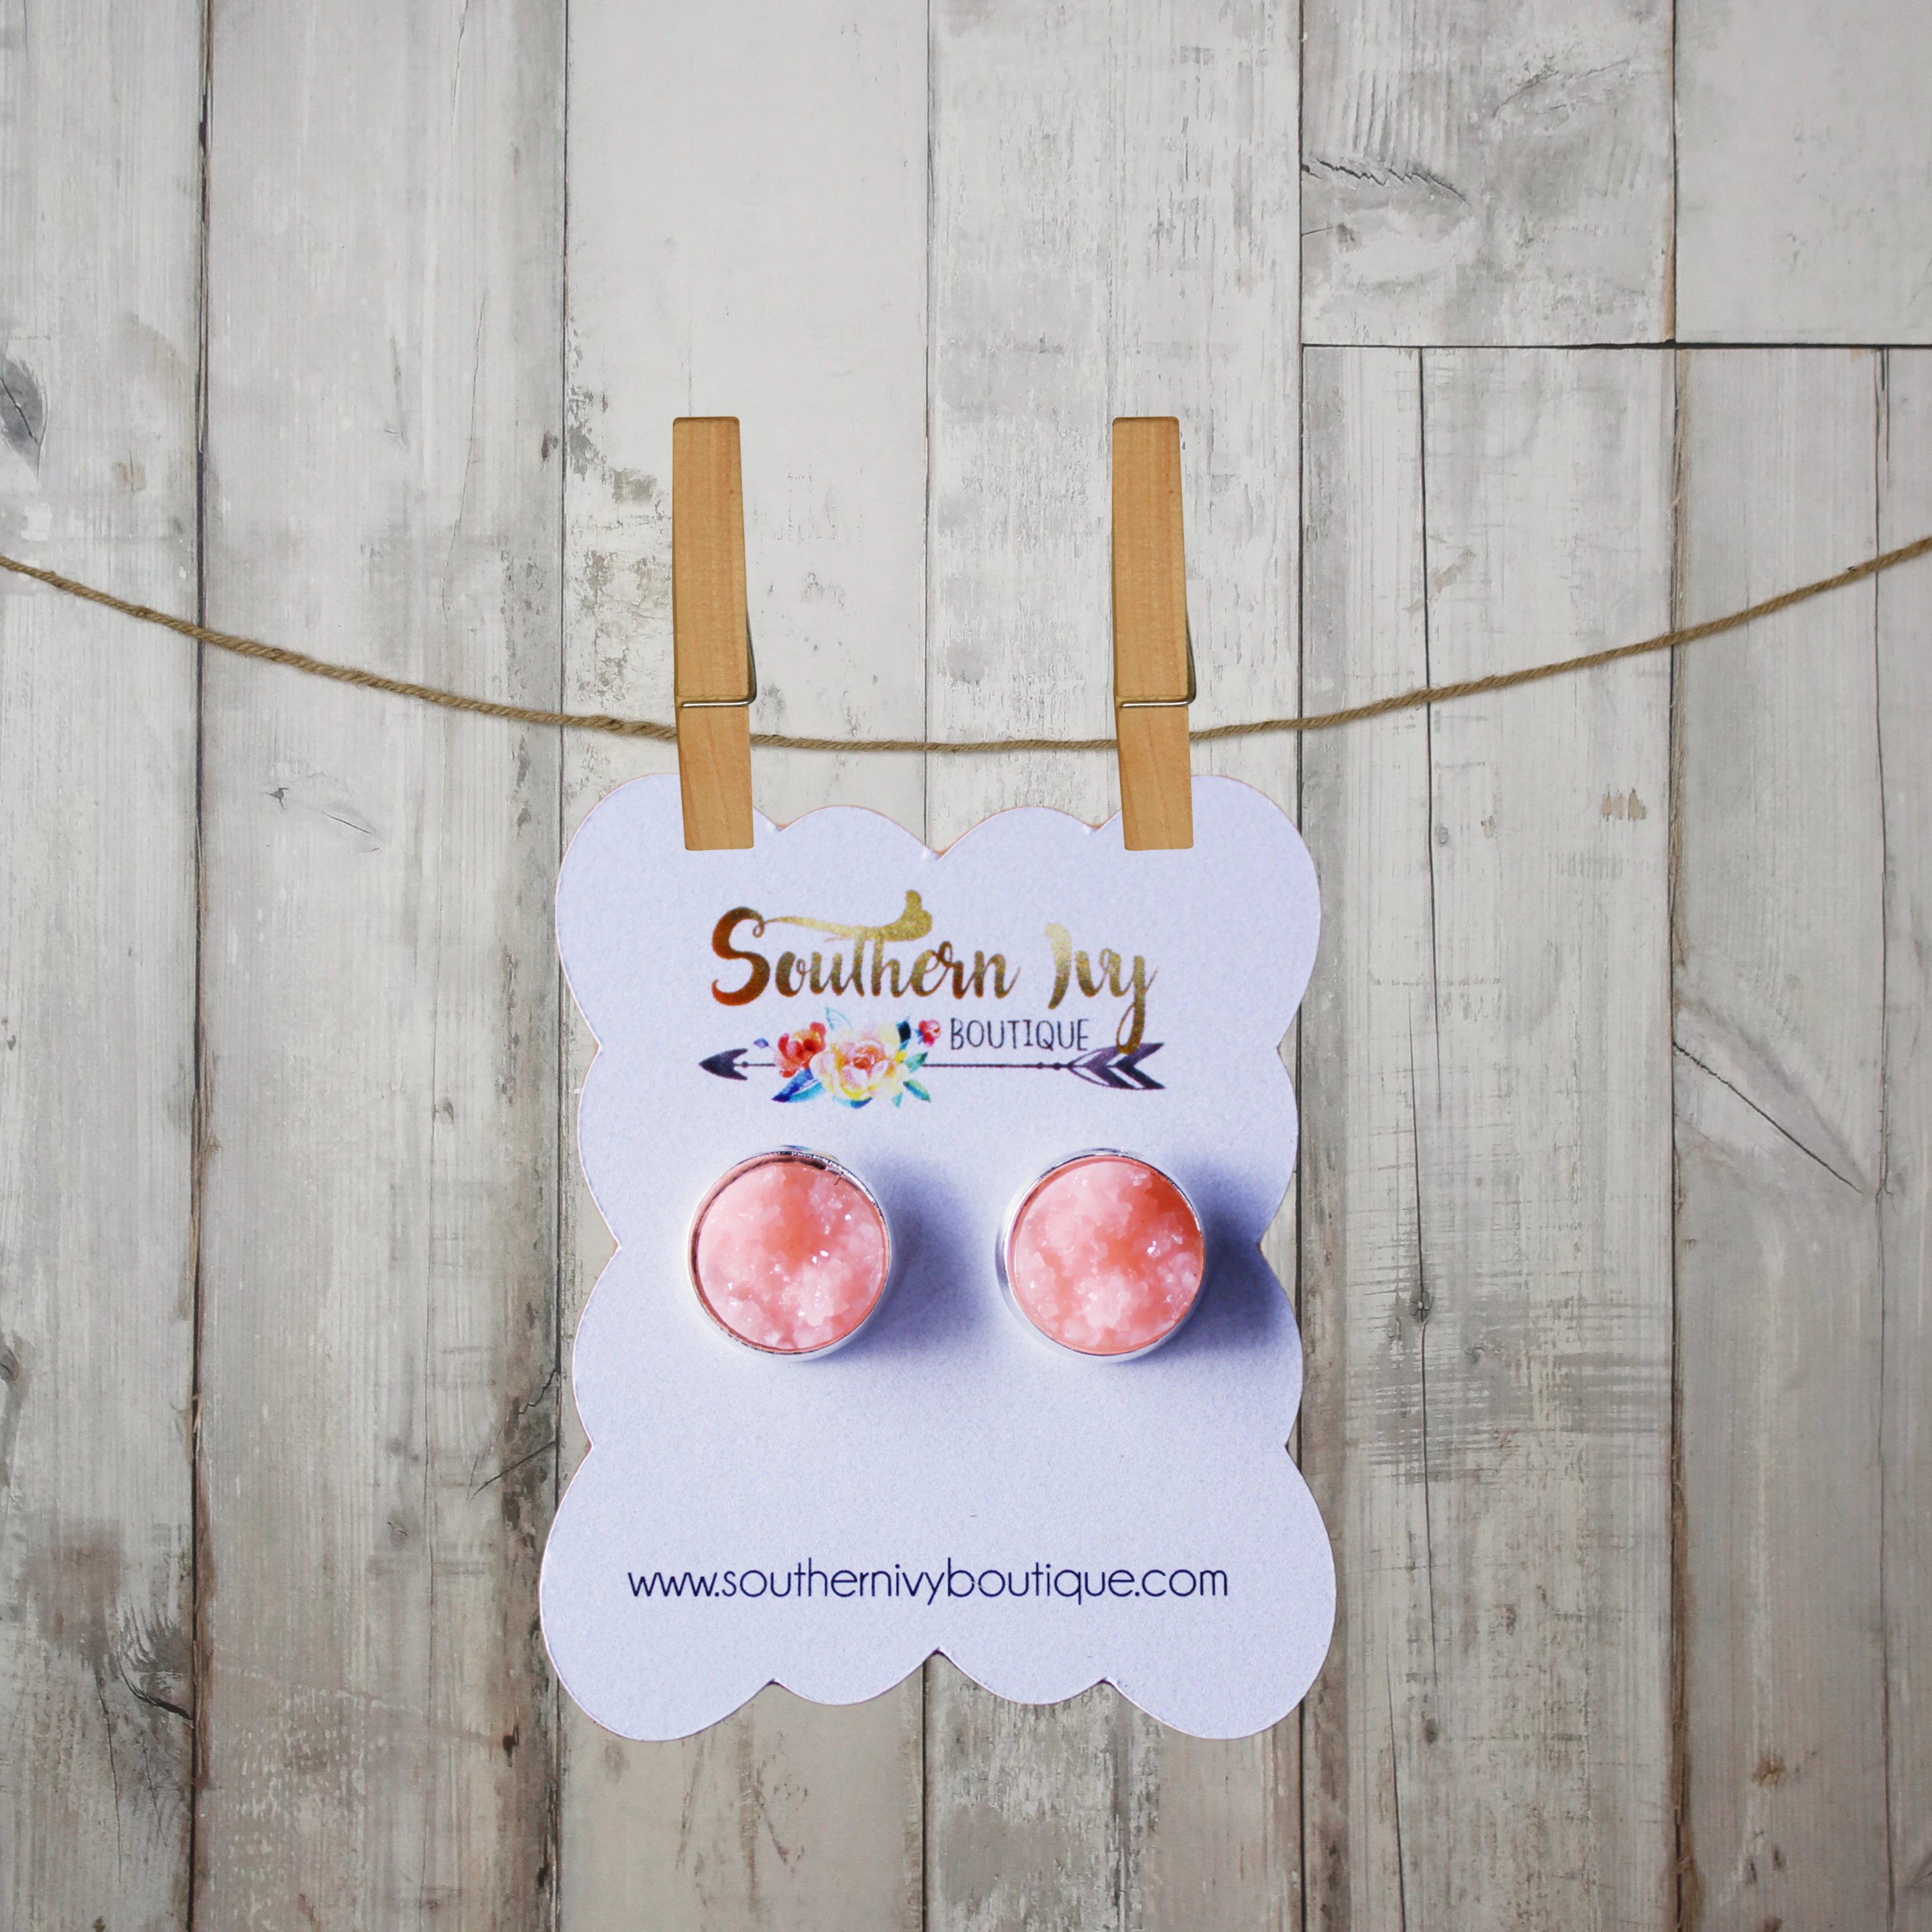 Peach & Silver Post Druzy Earring - Southern Ivy Boutique